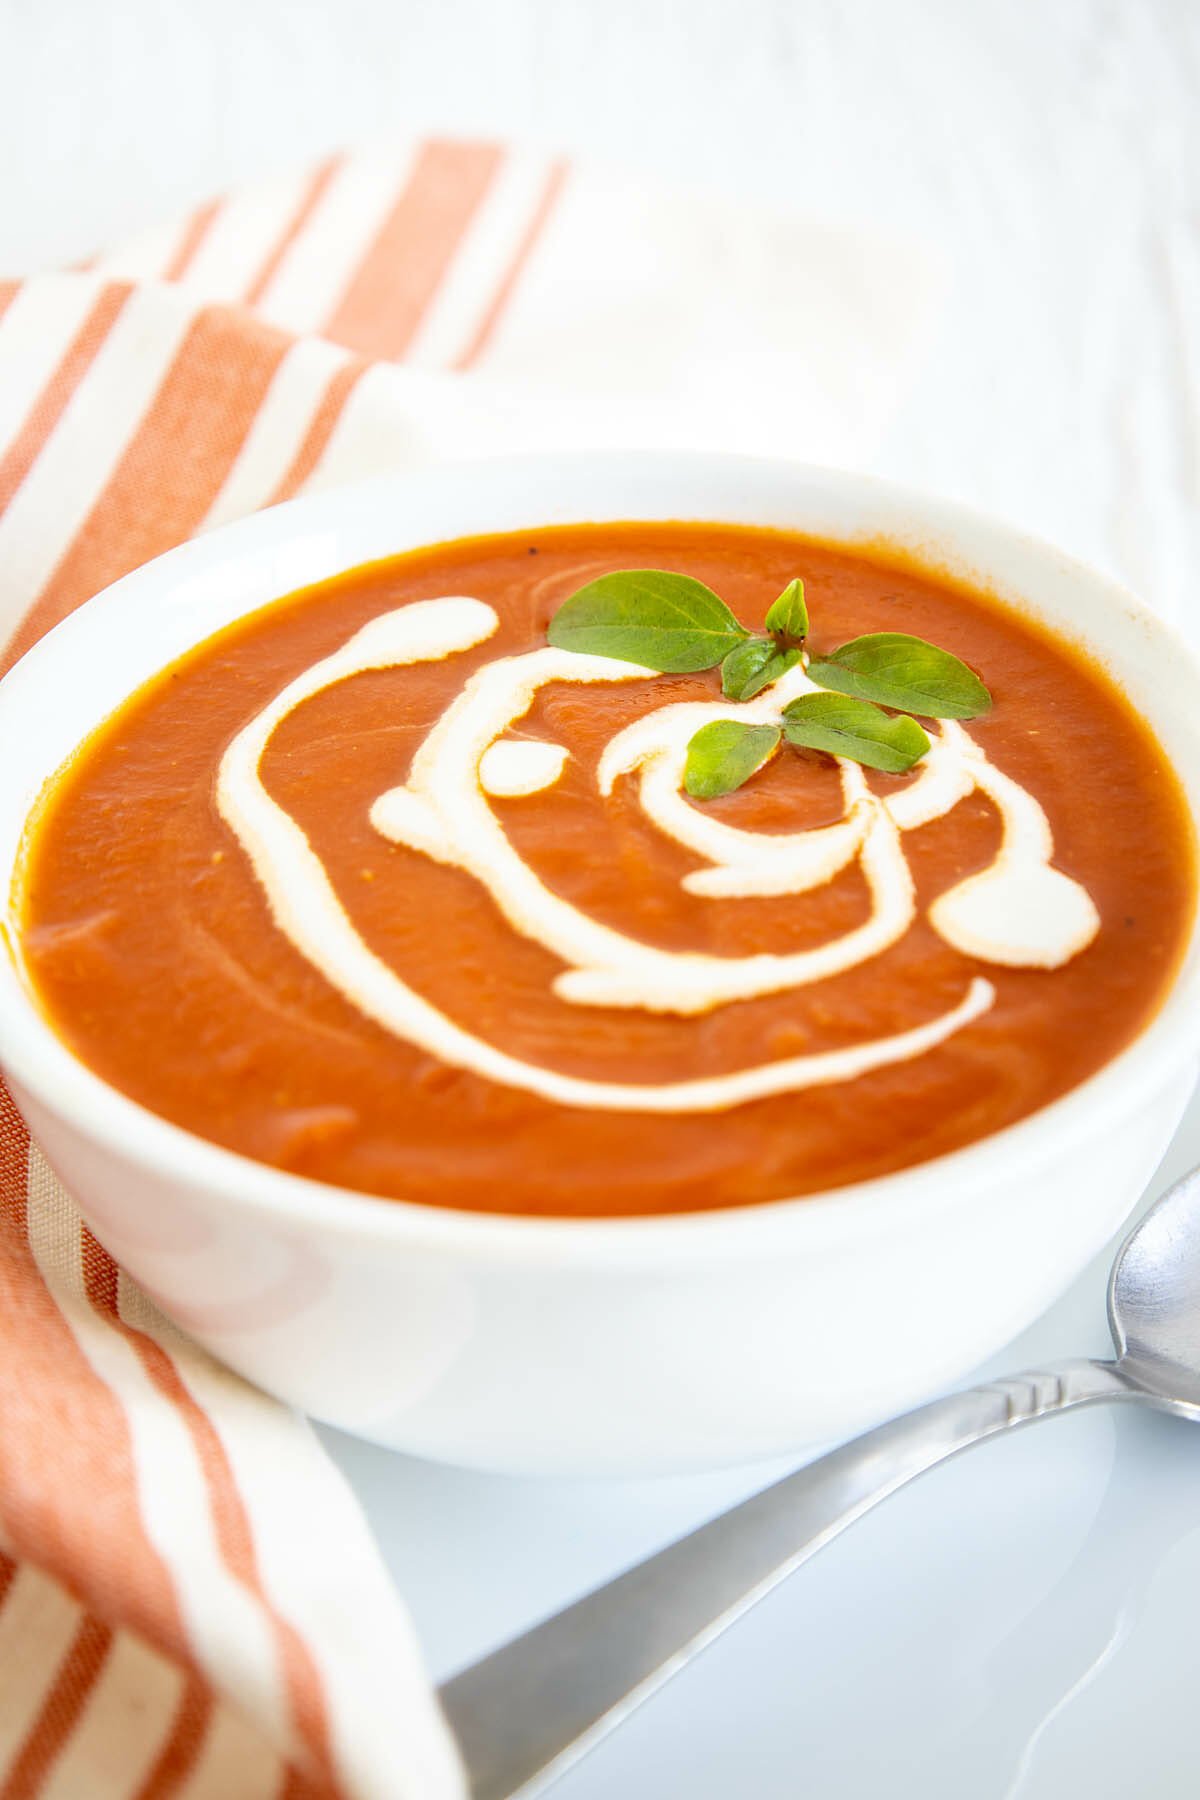 5 Ingredient Sun-Dried Tomato Soup in a bowl with spoon.